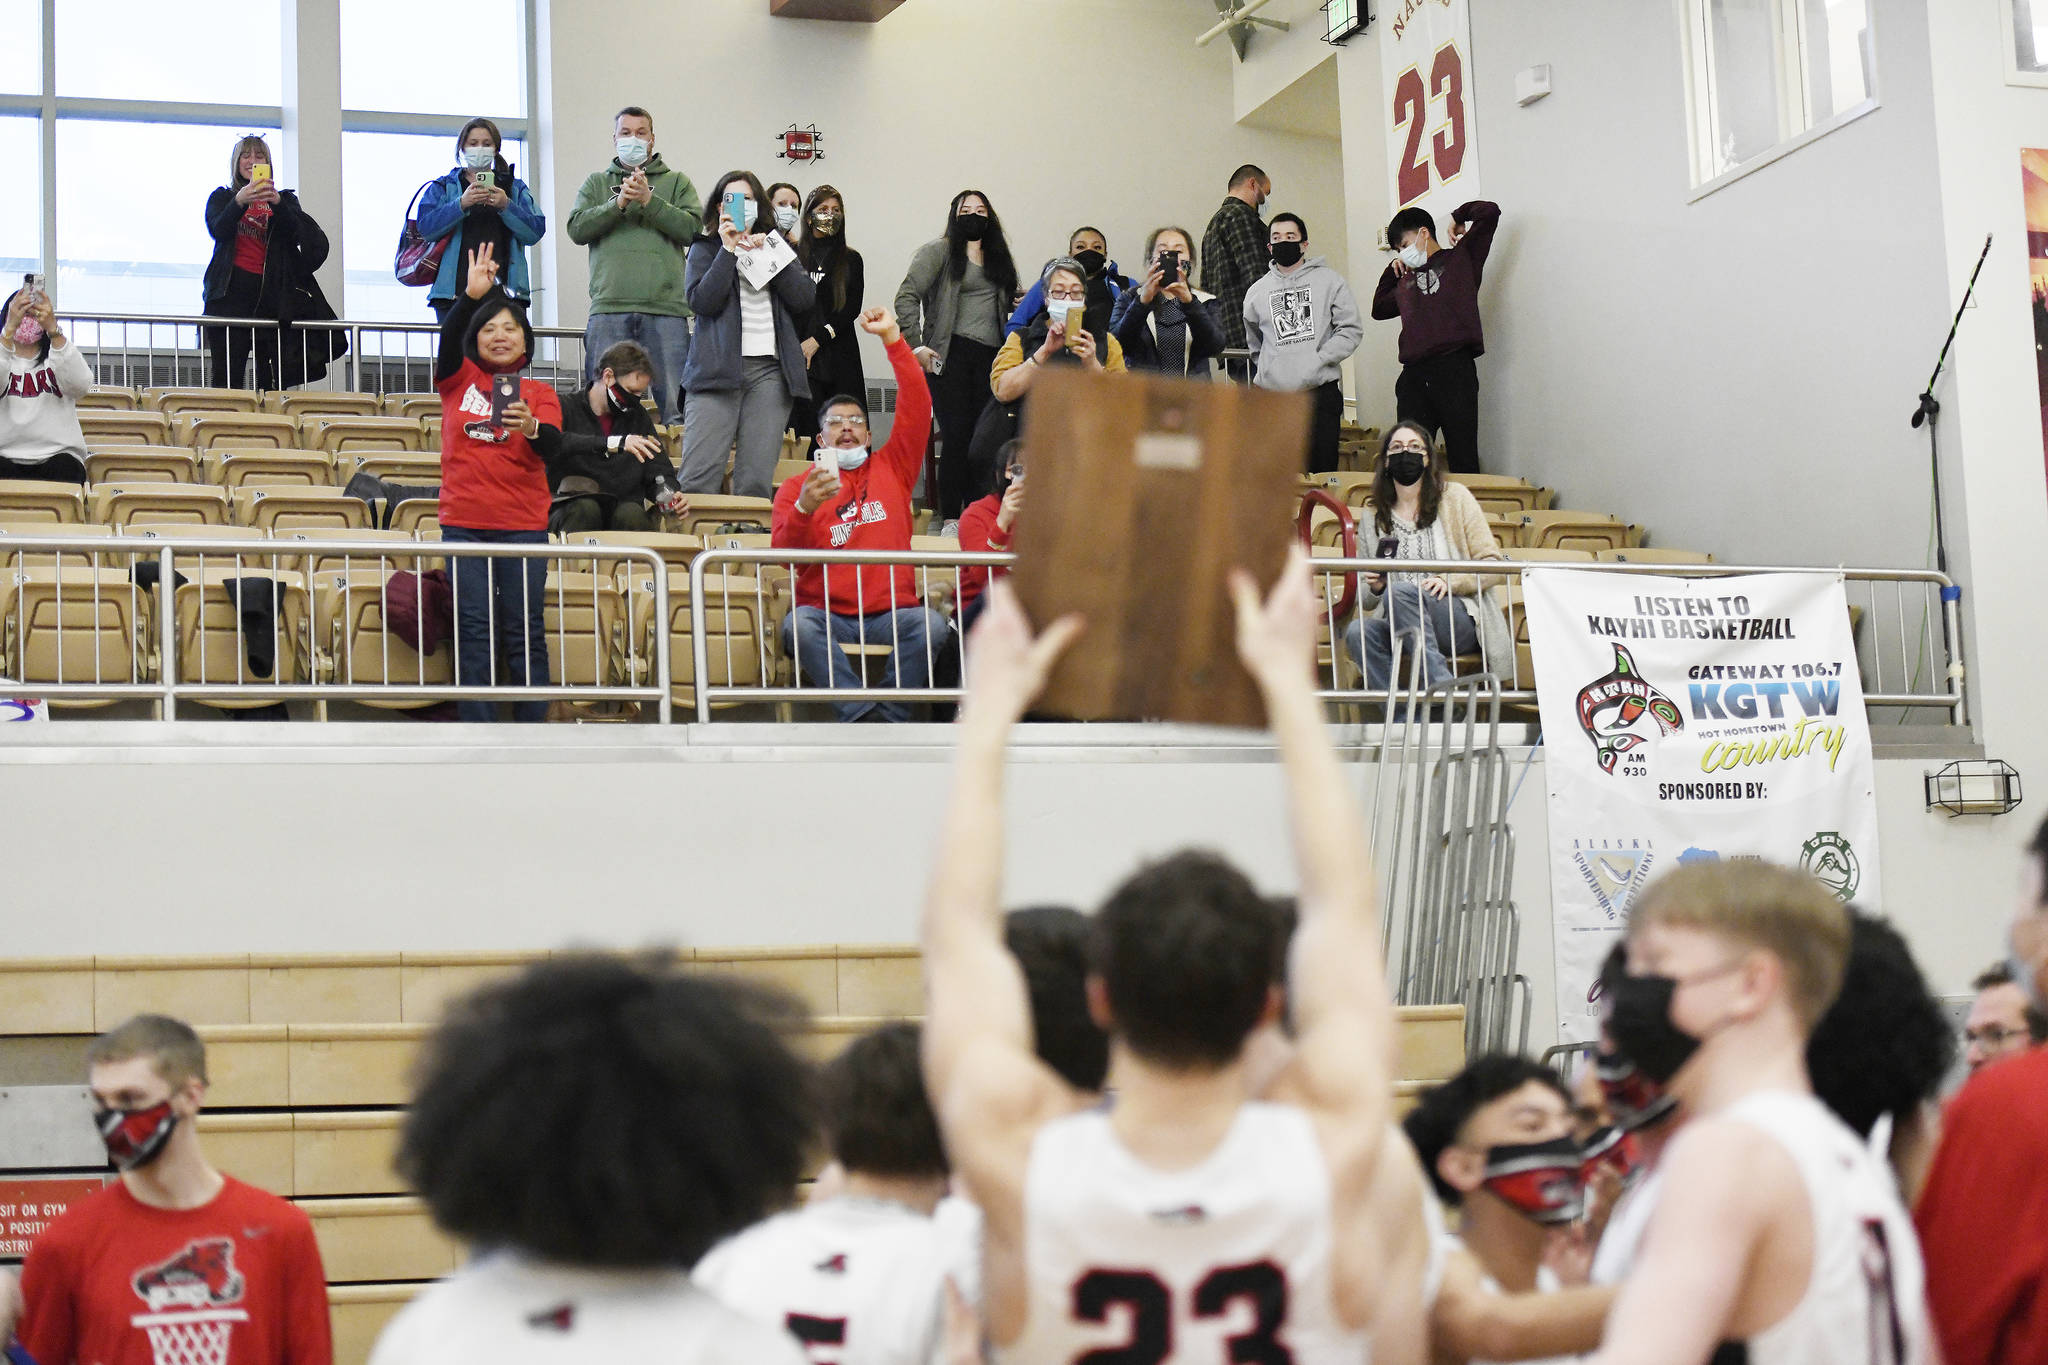 Juneau-Douglas High School: Yadaa.at Kalé player Cooper Kriegmont holds the 2021 Region V championship plaque up for Juneau spectators following a 87-68 win over Ketchikan in the boys’ varsity Region V basketball championship at Clarke Cochrane Gymnasium on Saturday, March 20, 2021. (Dustin Safranek / Ketchikan Daily News)